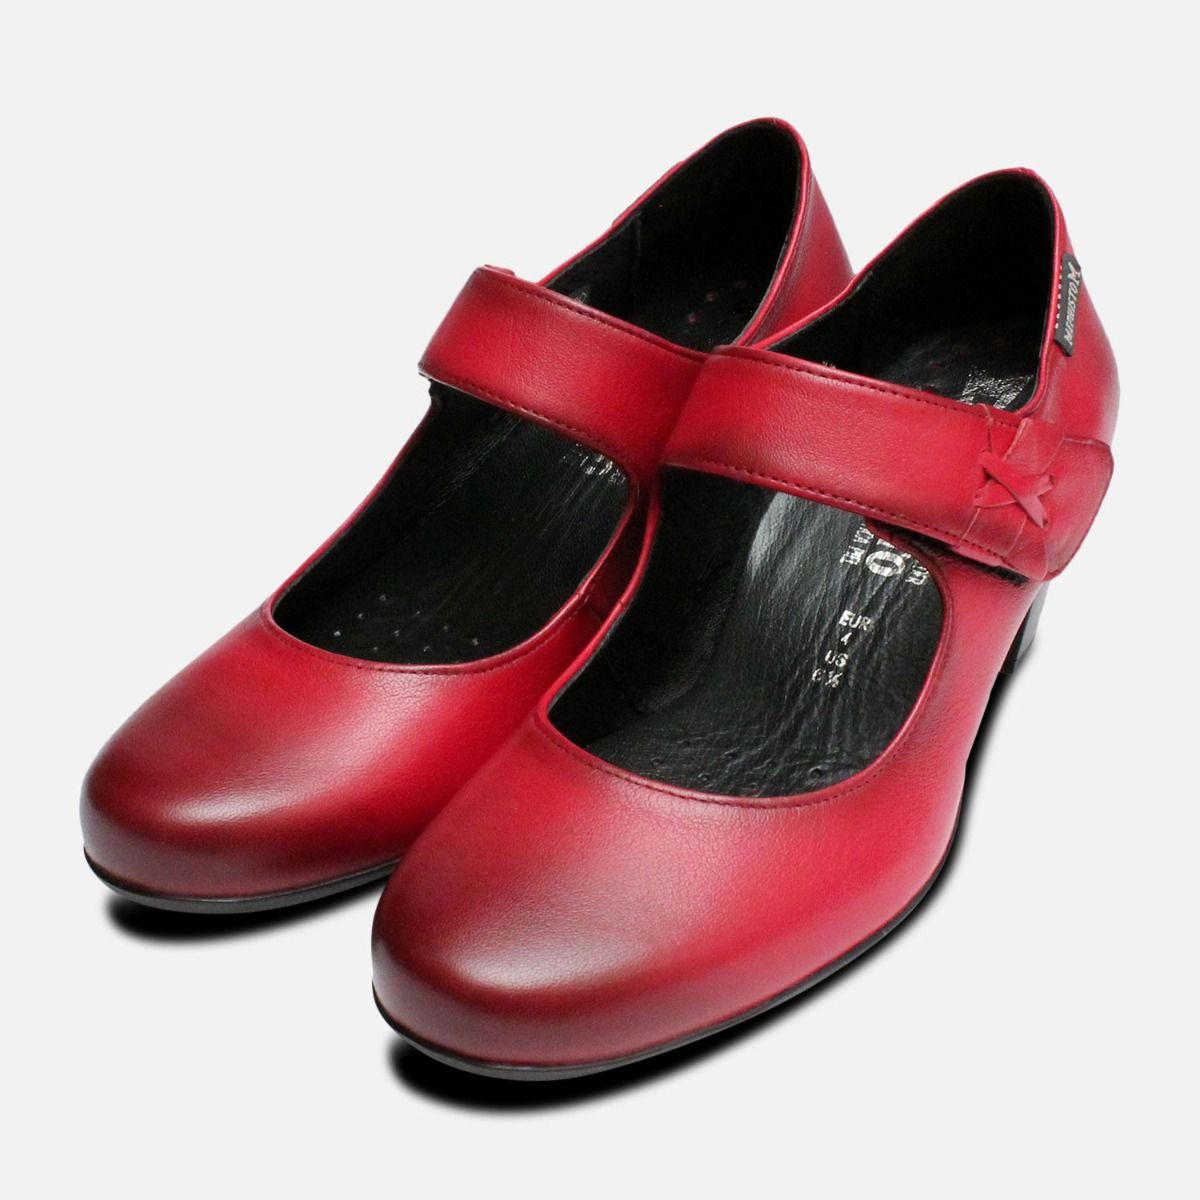 mary jane shoes ladies